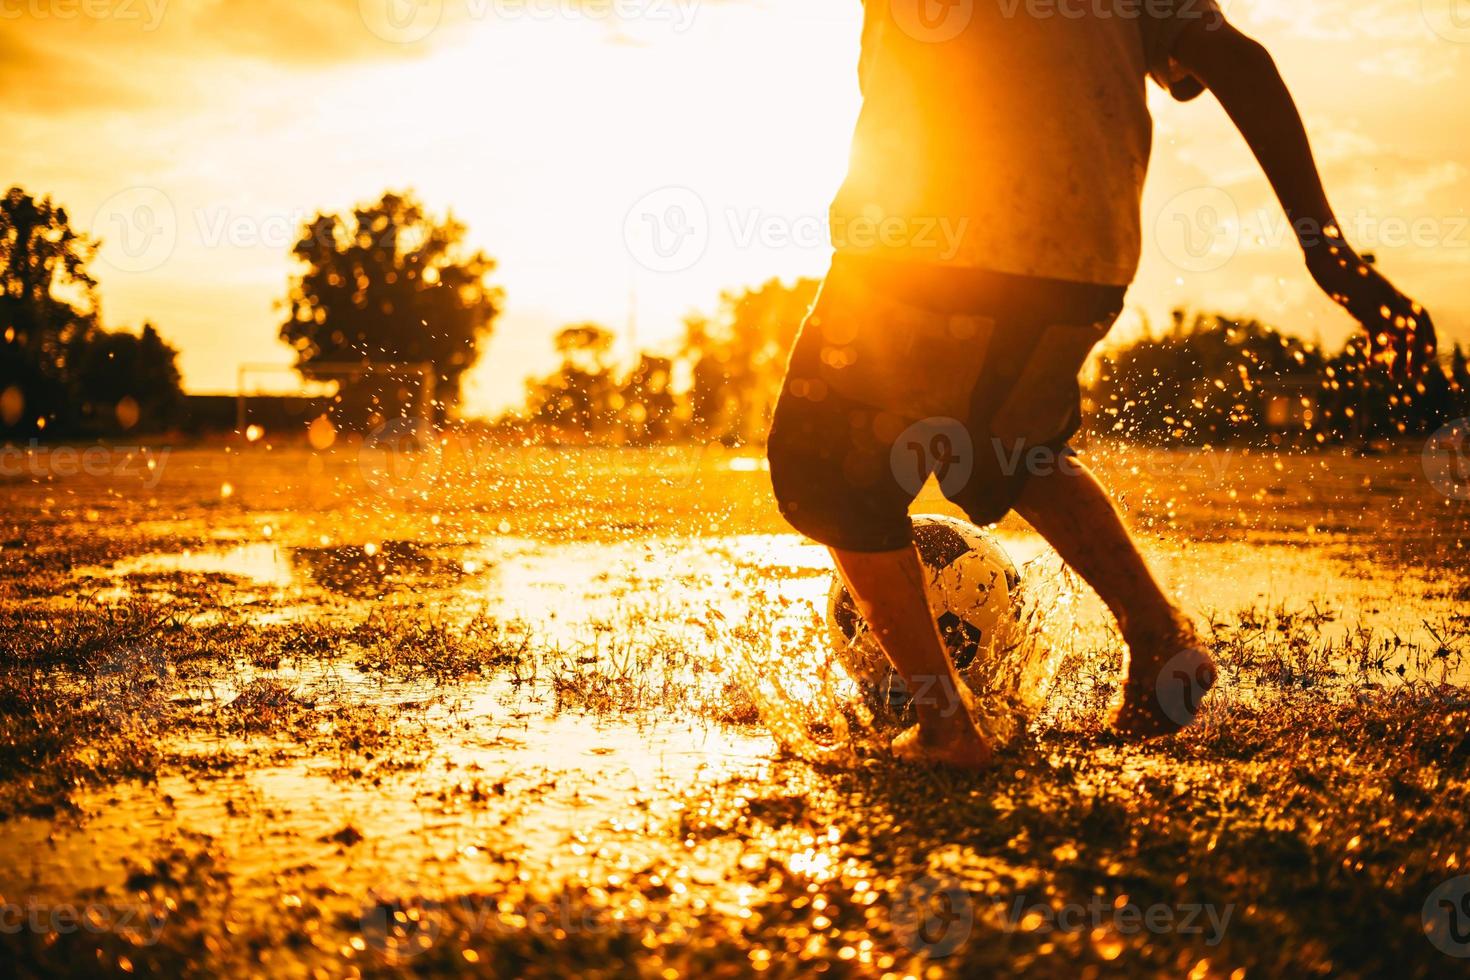 action sport picture of a group of kids playing soccer football for exercise in community rural area under the rain photo